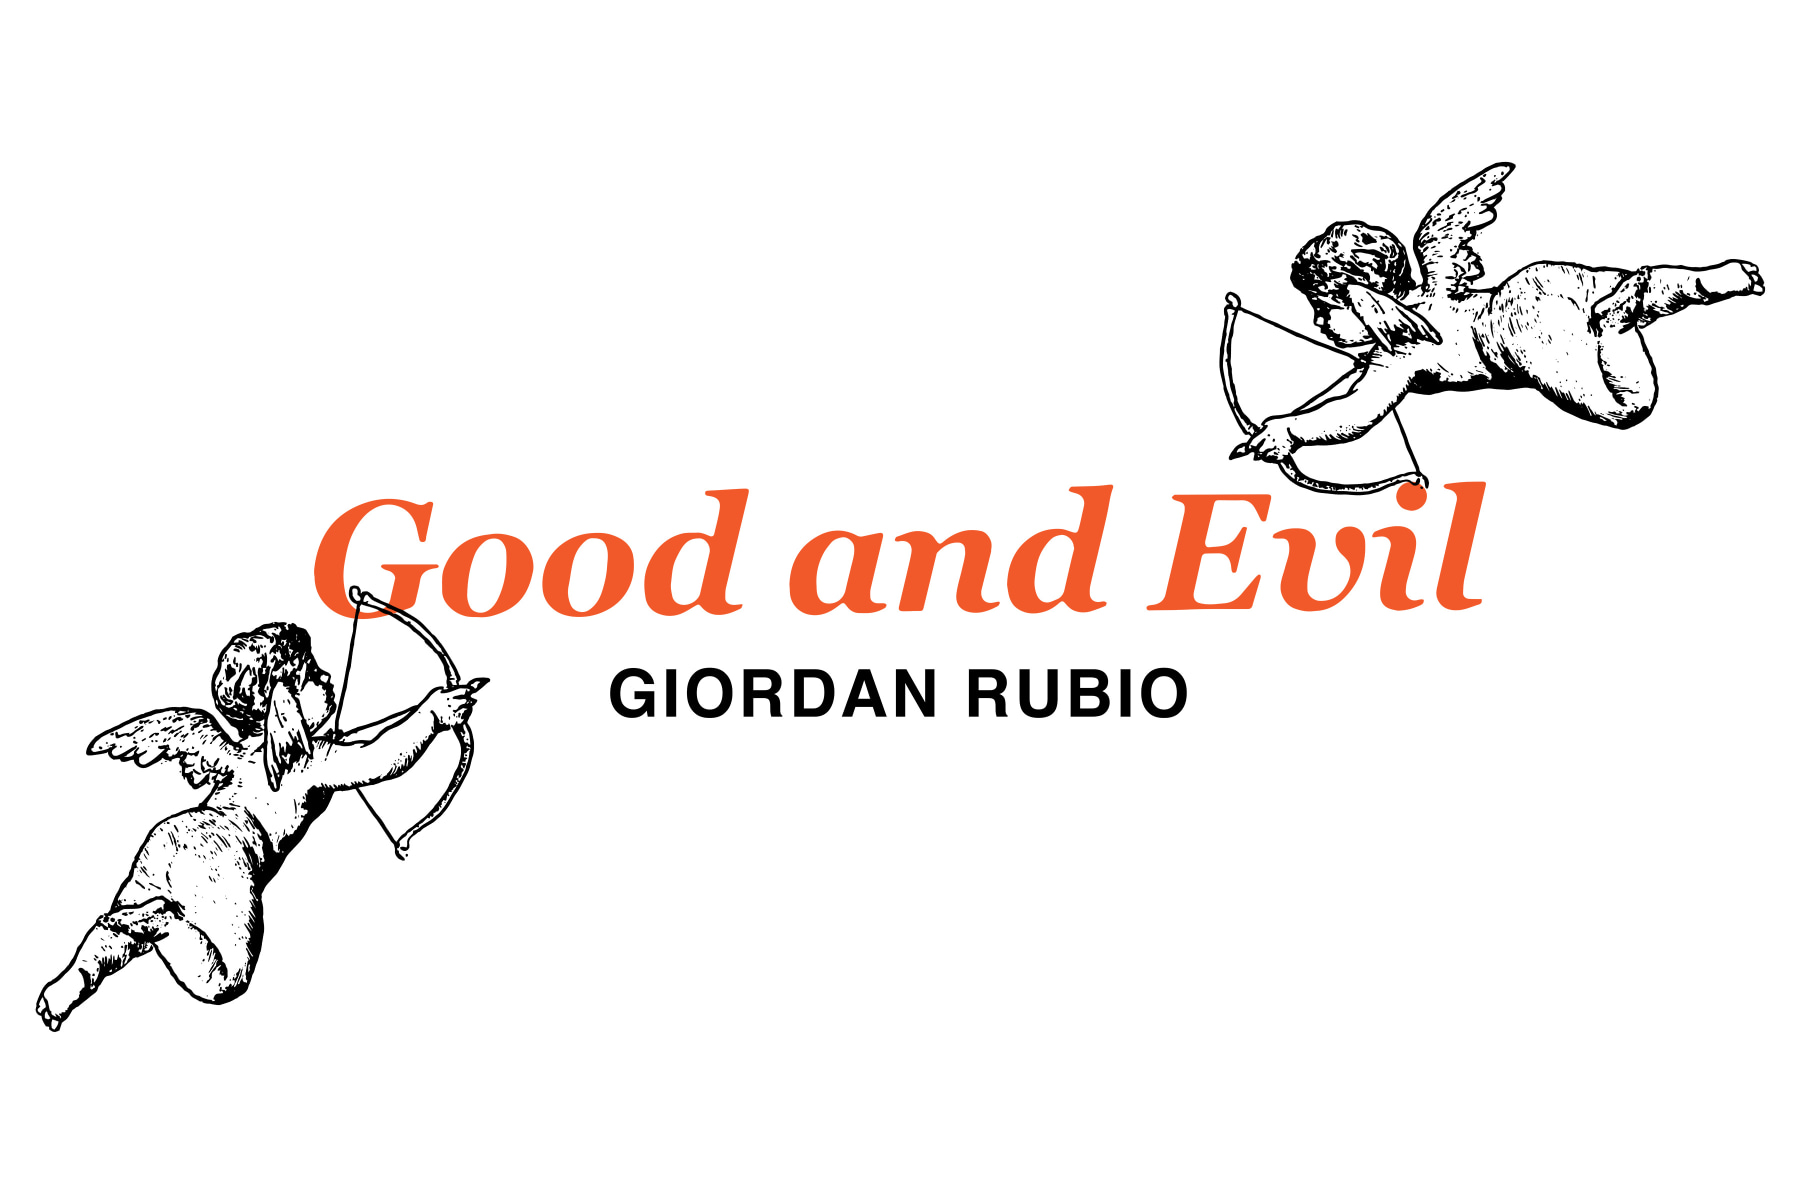 Giordan Rubio: Good and Evil - New York, NY - Viewing Room - Taglialatella Galleries Viewing Room